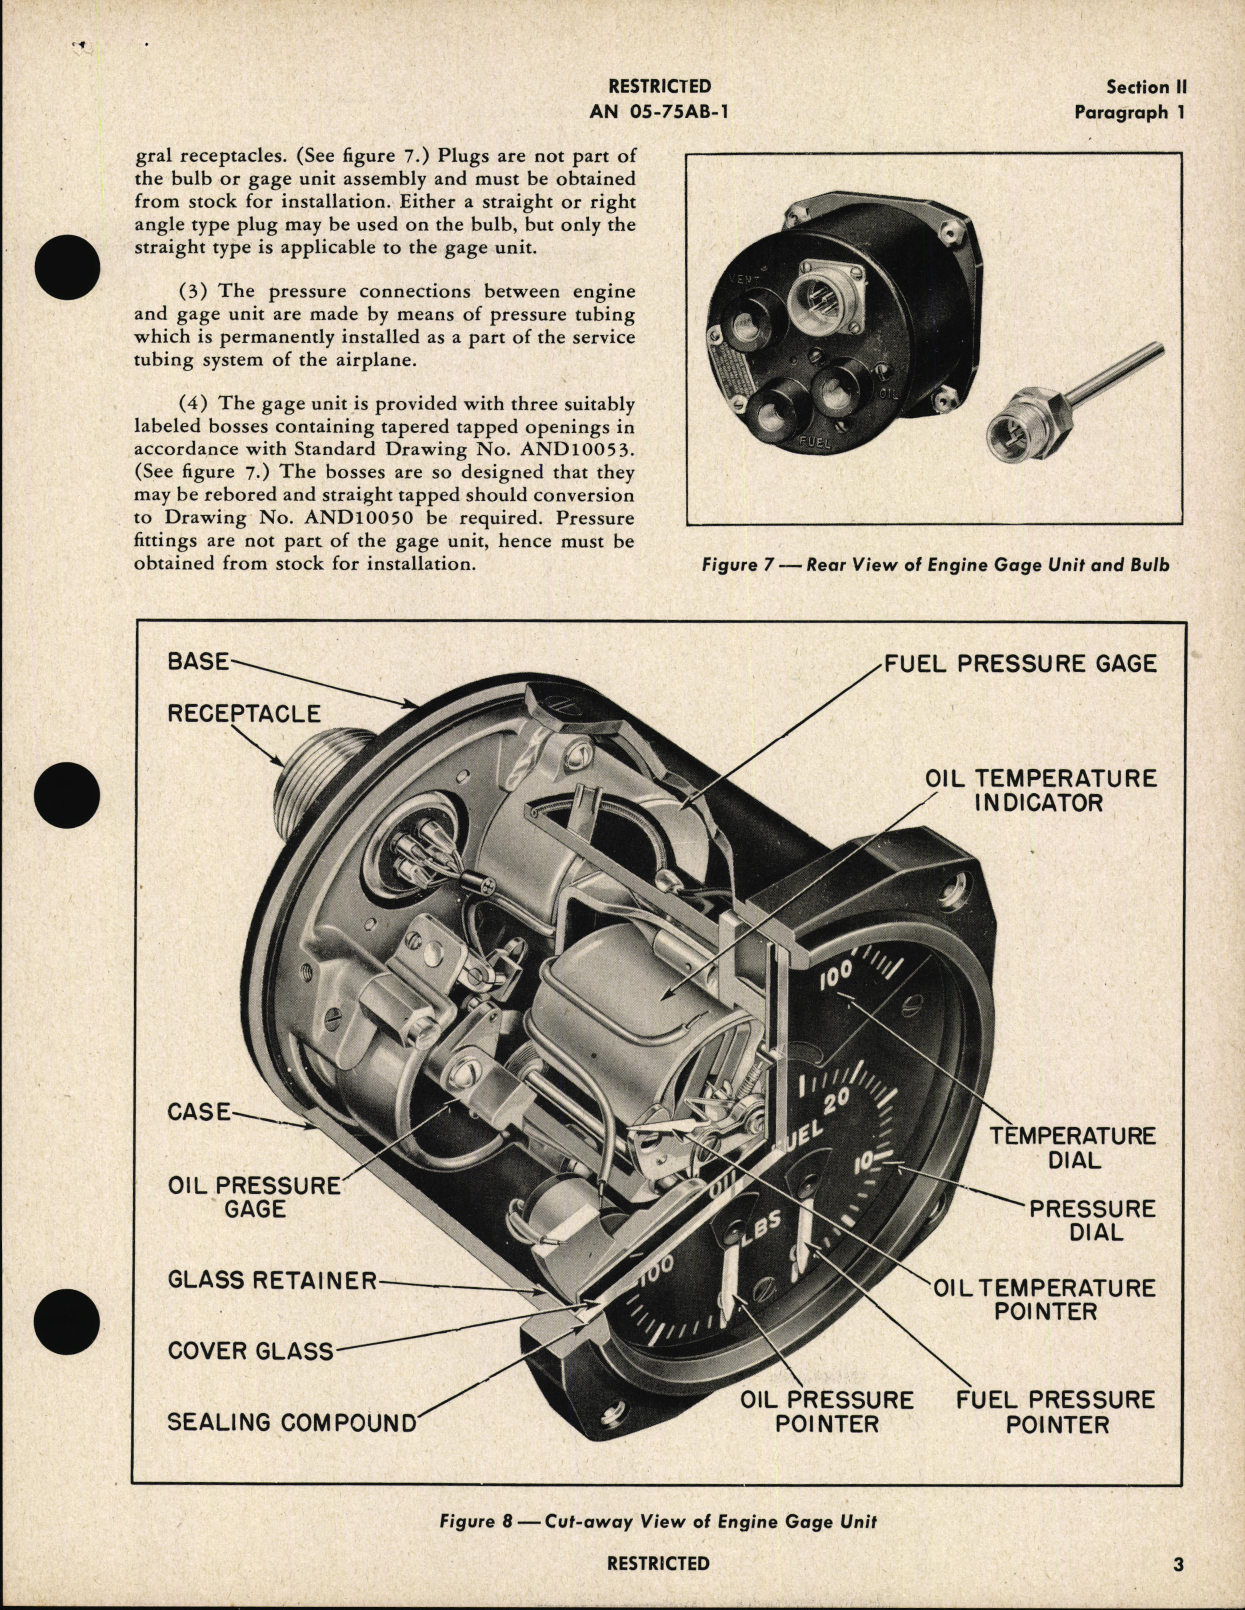 Sample page 7 from AirCorps Library document: Operation, Service, & Overhaul Instructions with Parts Catalog for Engine Gage Units